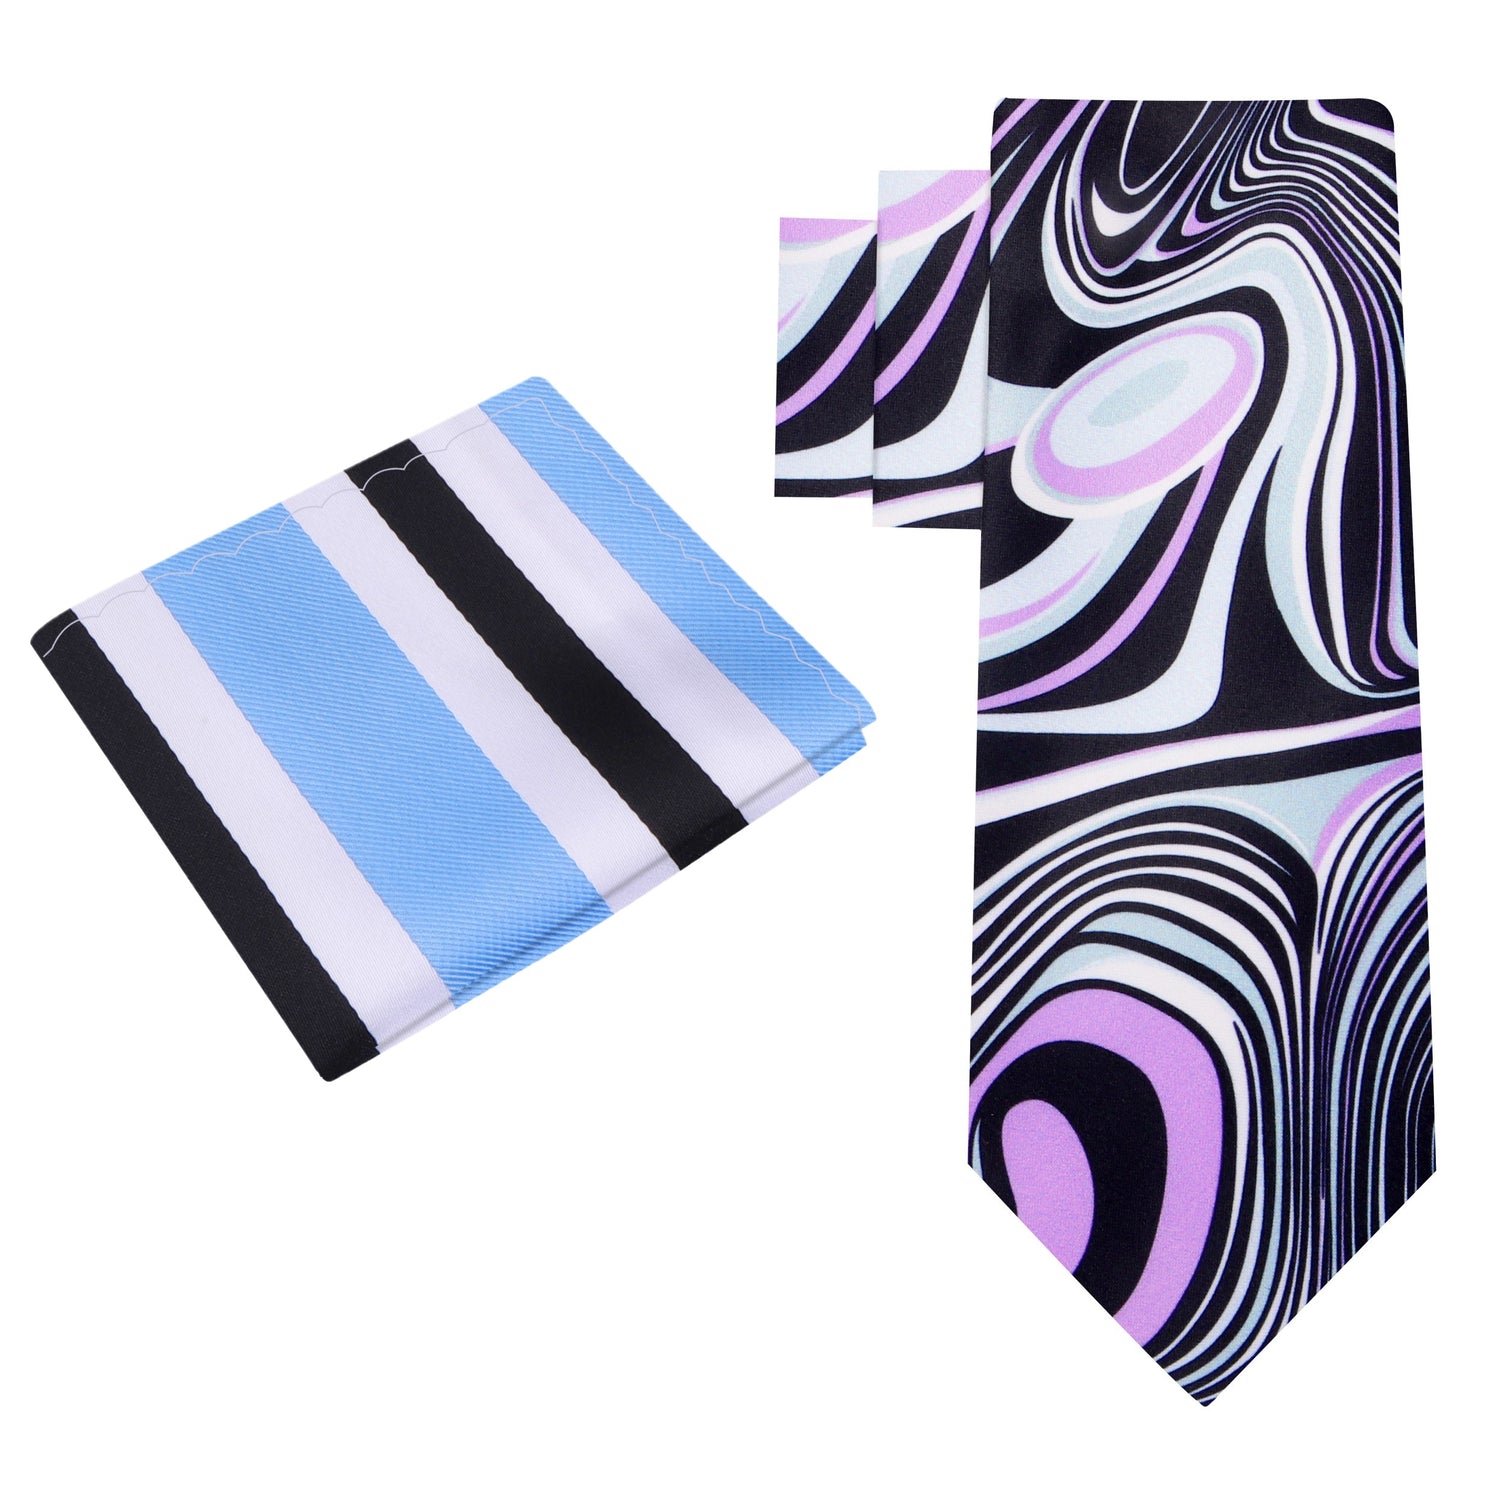 Alt View: Pink, Light Blue, Black Abstract Tie and Blue, White, Black Stripe Square